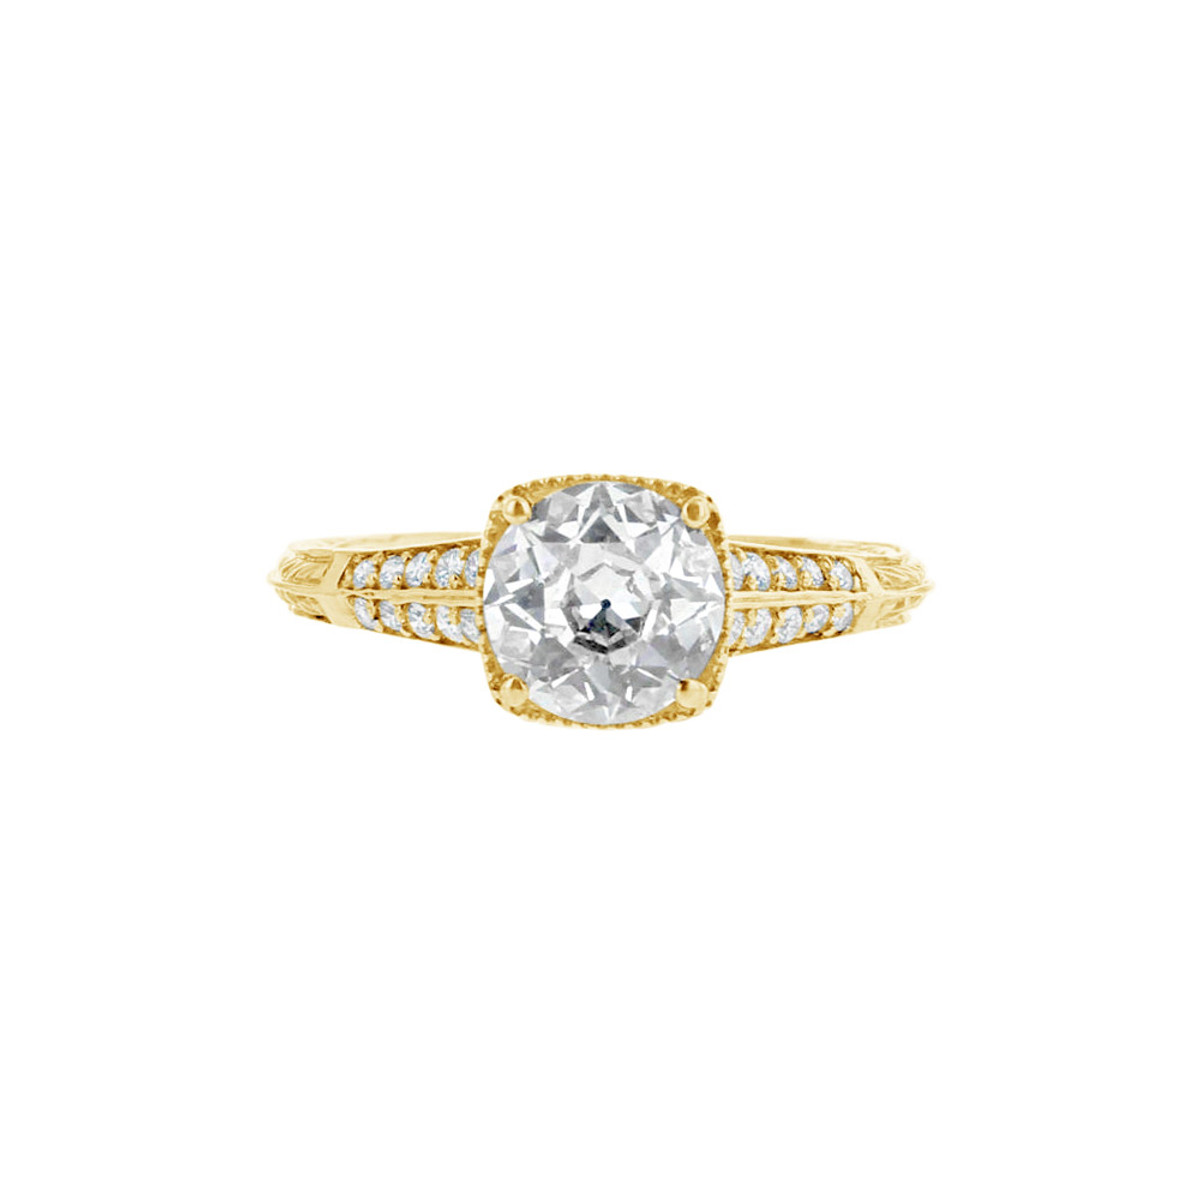 Engage By Hyde Park 18KT Yellow Gold & 1.54CT GIA Diamond Vintage Solitaire Engagement Ring-DSCRD0499